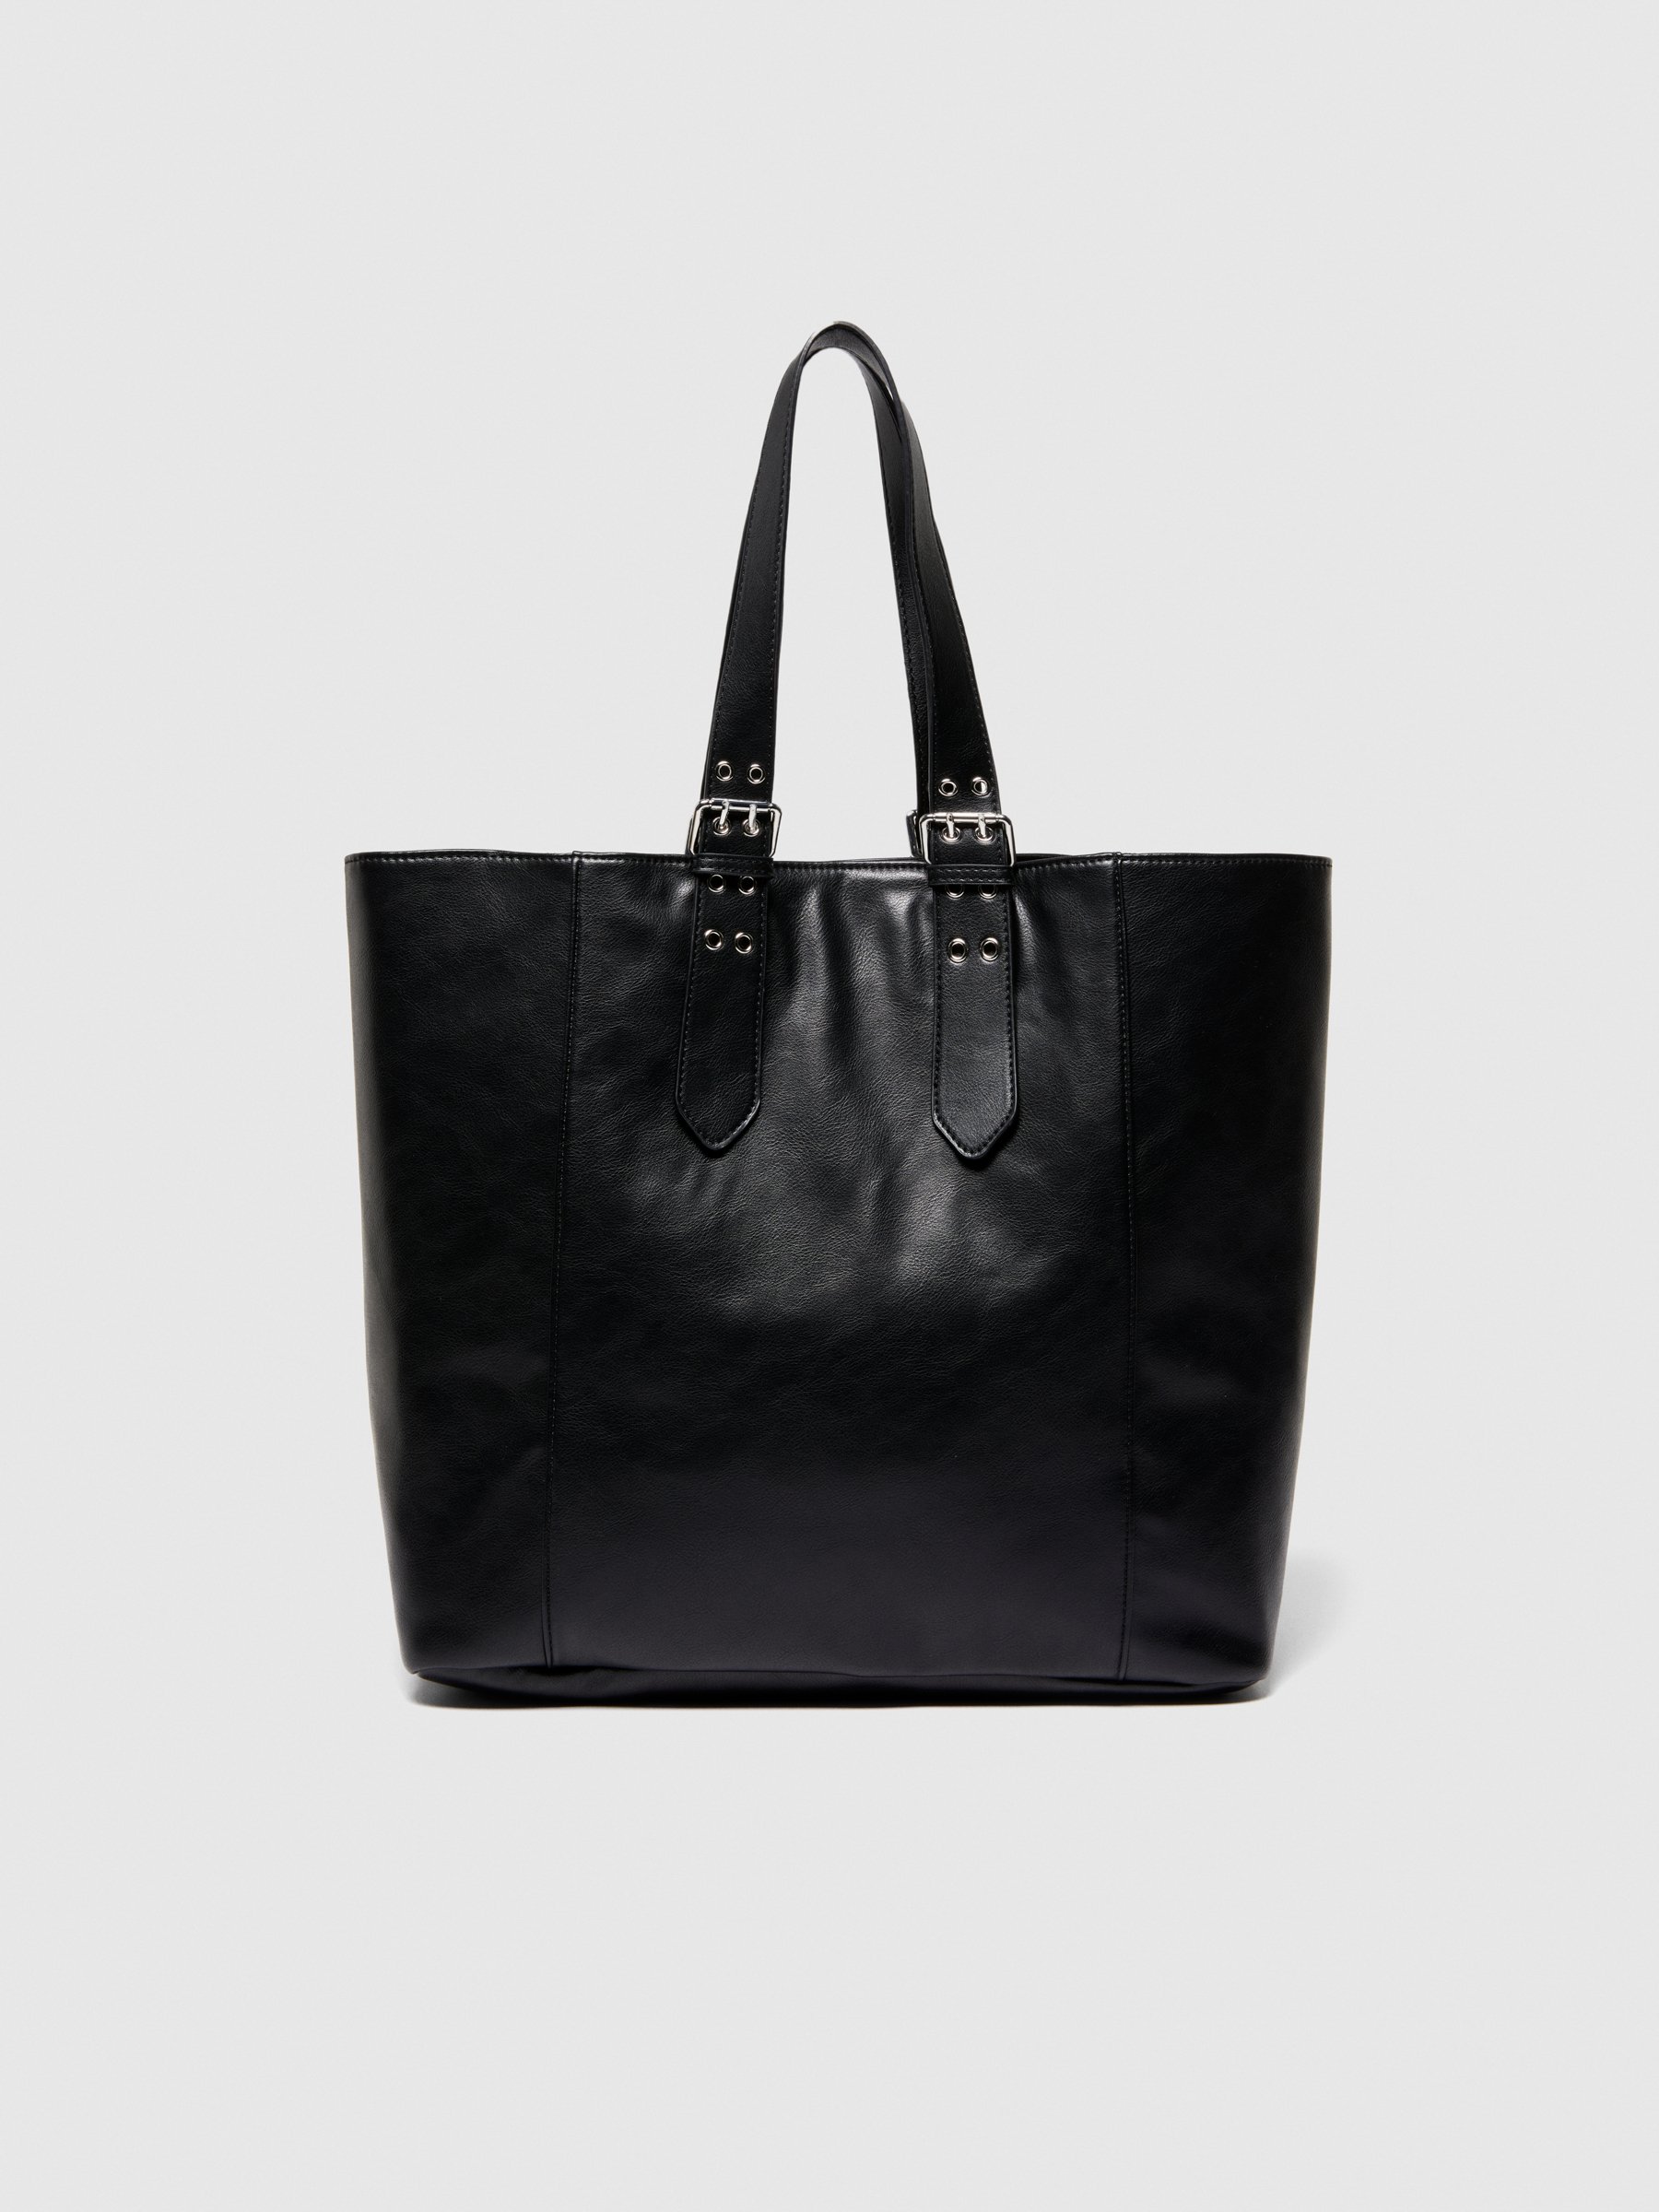 Sisley - Tote Bag With Buckles, Woman, Black, Size: ST